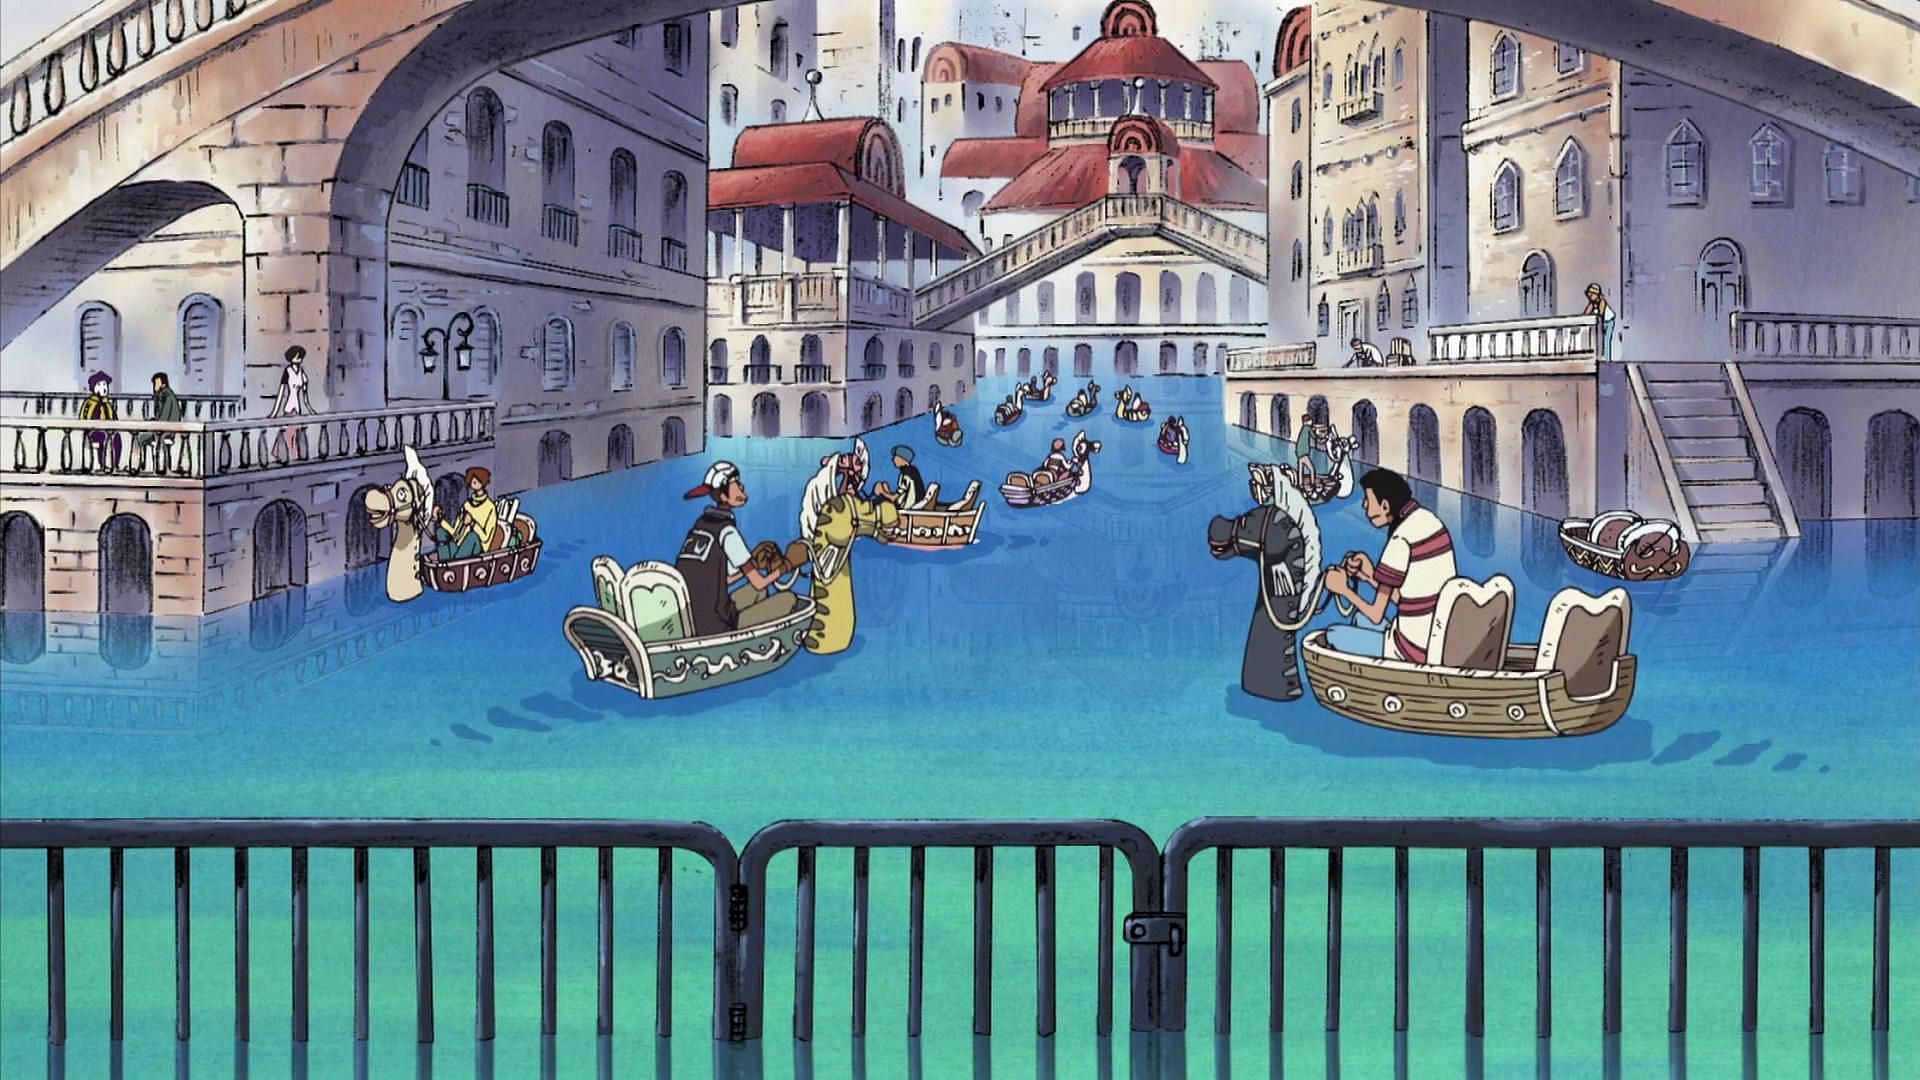 Water Seven as seen in the One Piece anime (Image via Toei Animation, One Piece)